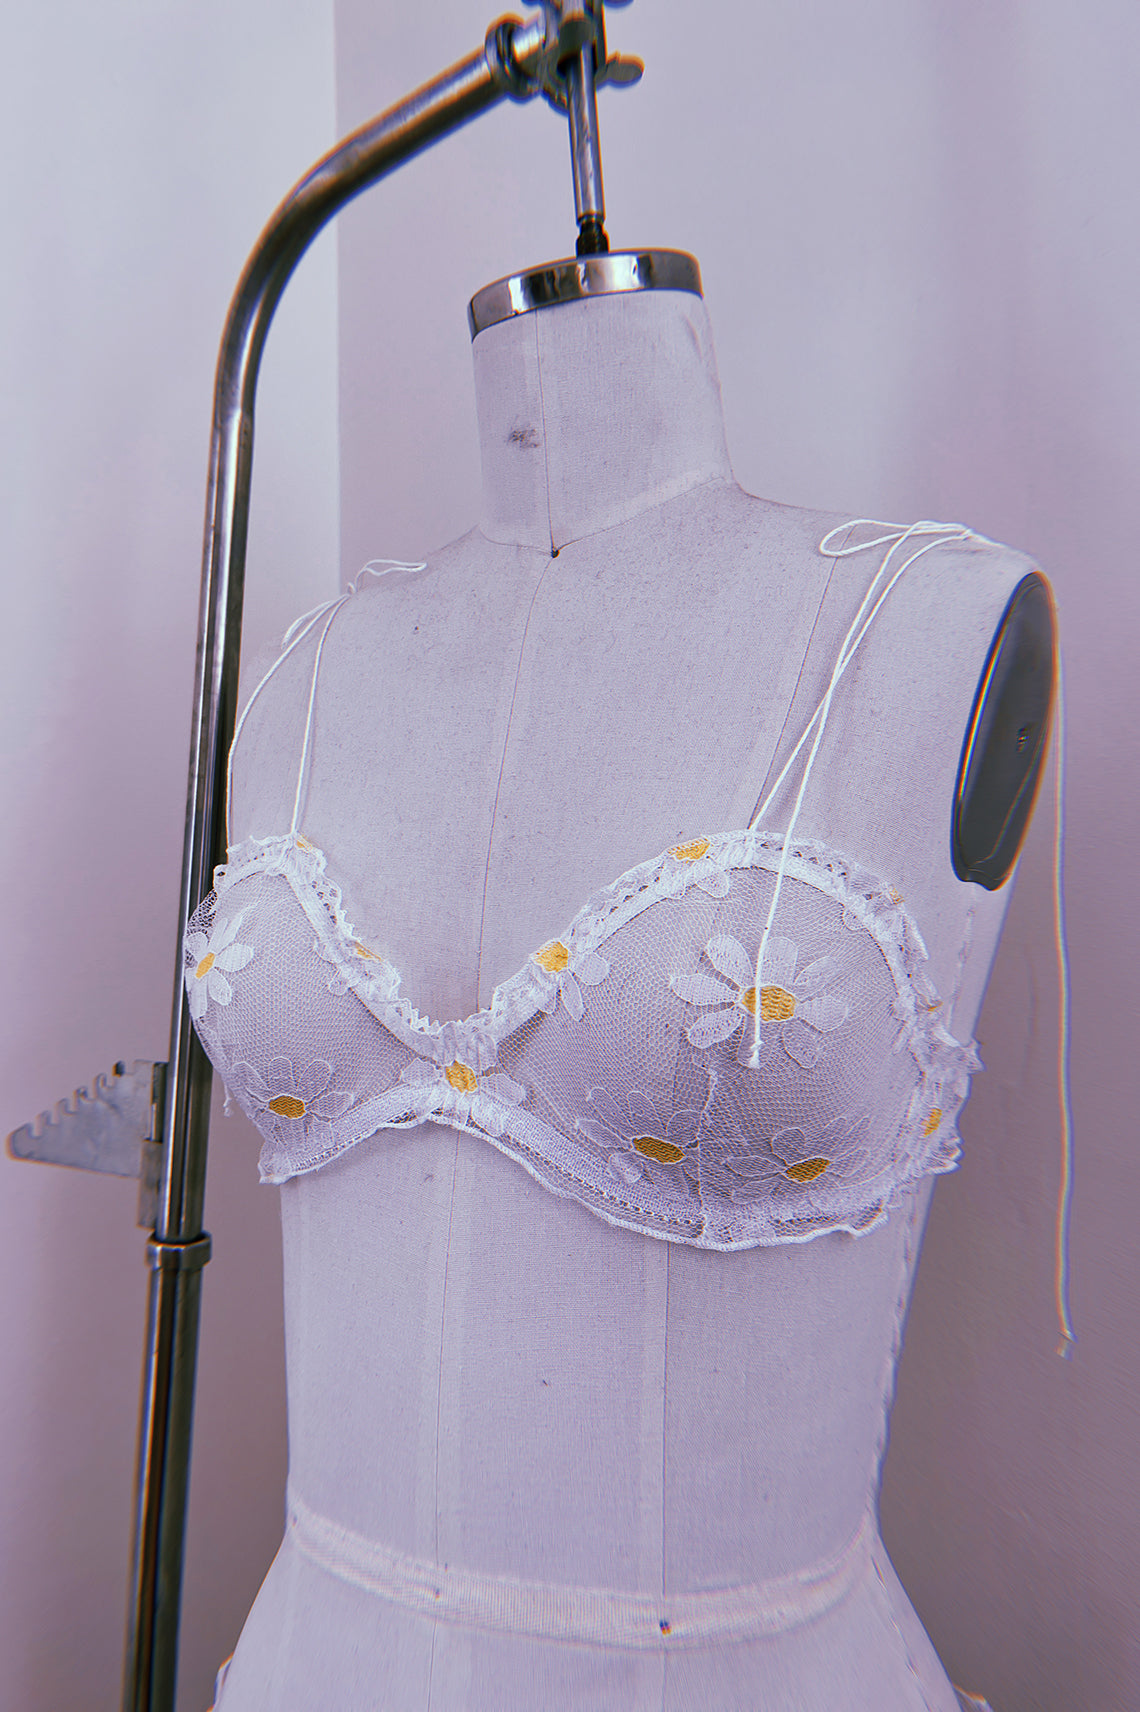 BACK IN STOCK! Anaphora Bralette in Sheer Upcycled Vintage Daisy Tulle